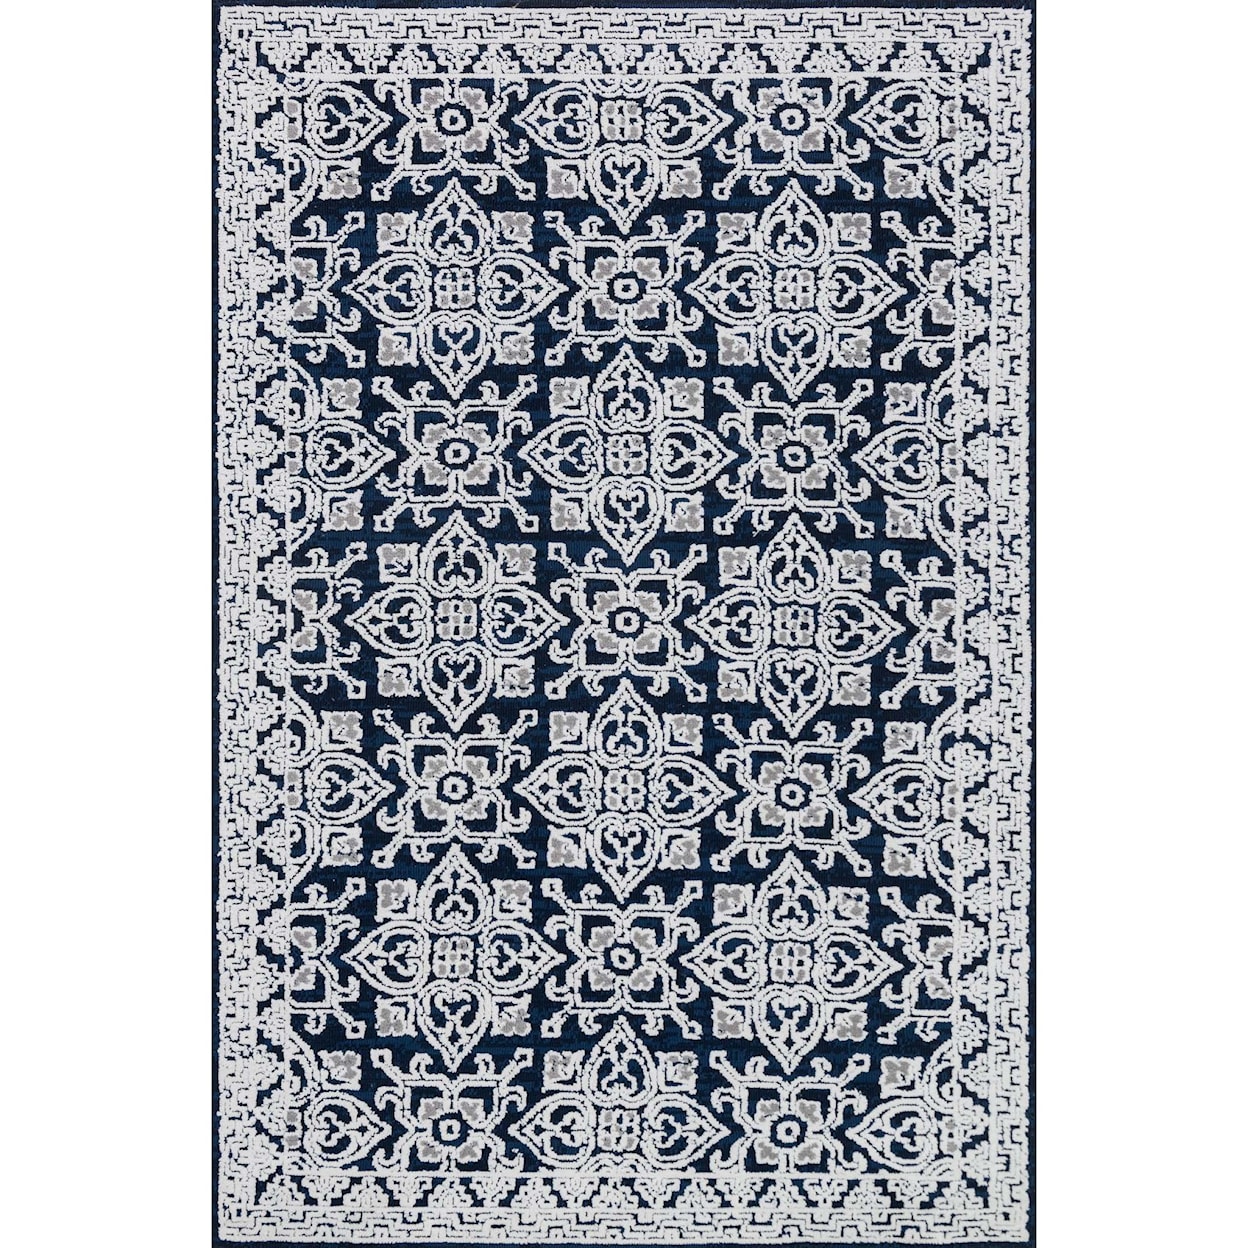 Magnolia Home by Joanna Gaines for Loloi Lotus 3' 6" x 5' 6" Rectangle Rug